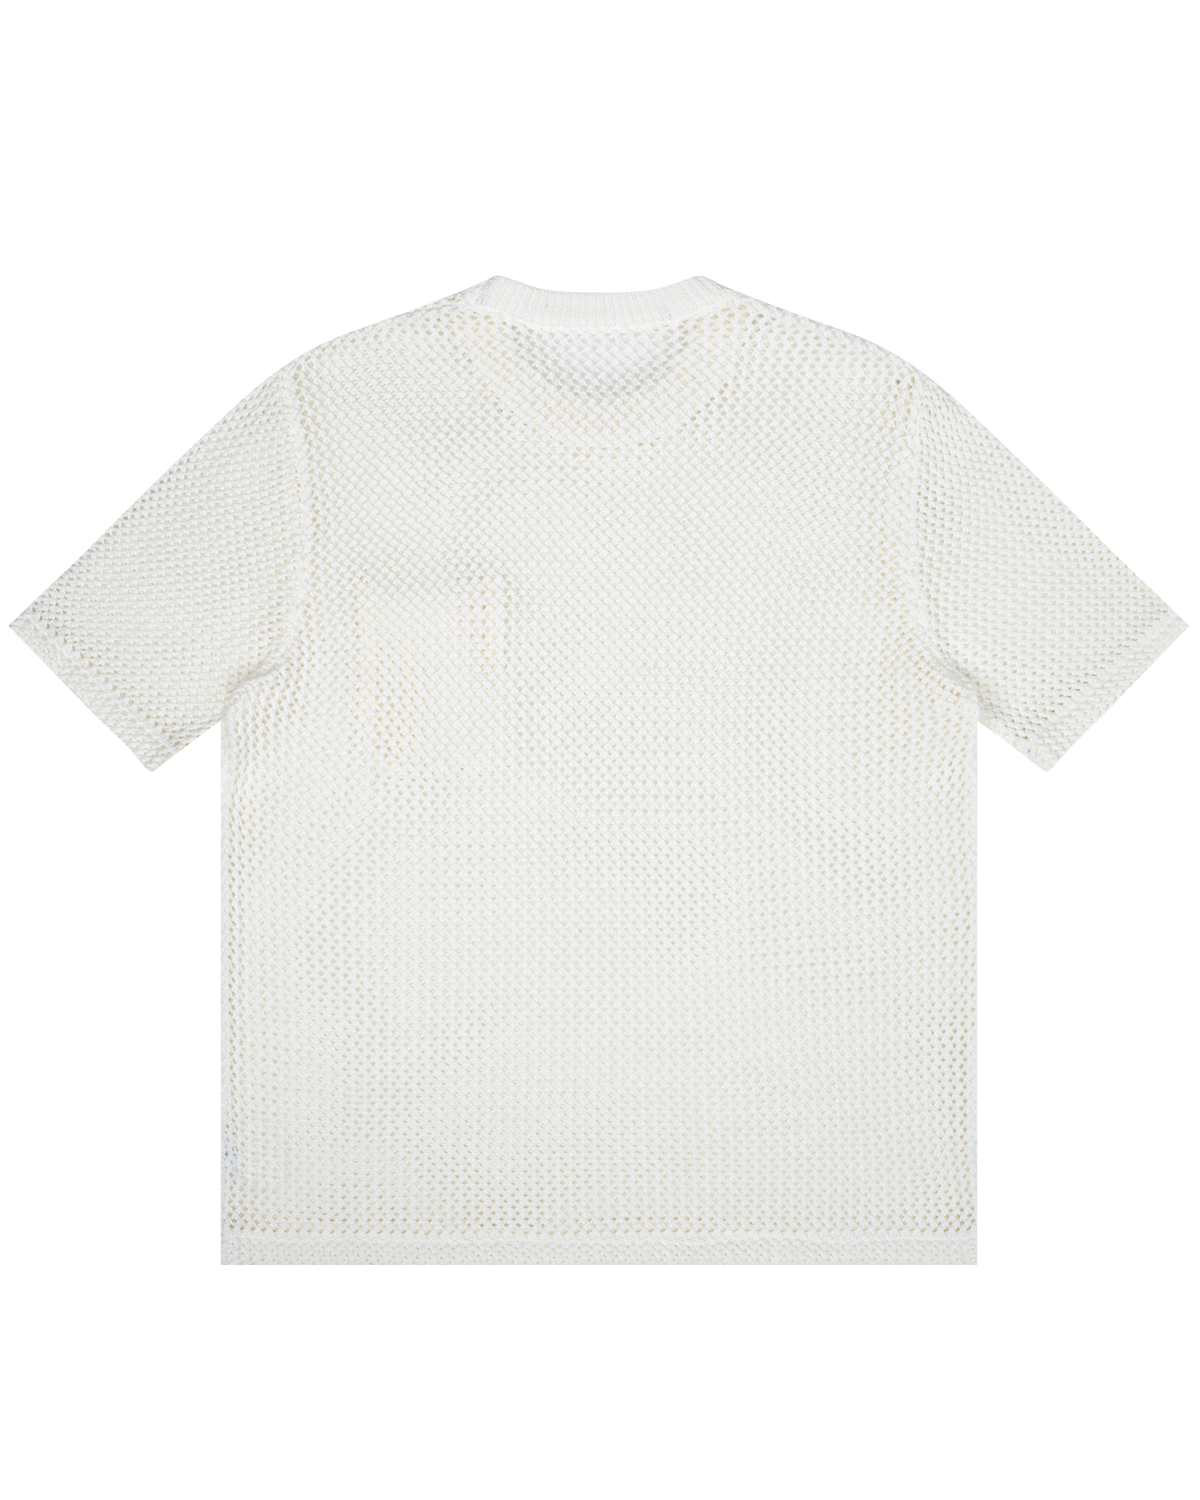 Off The Label hybrid structures  knit  t-shirt white